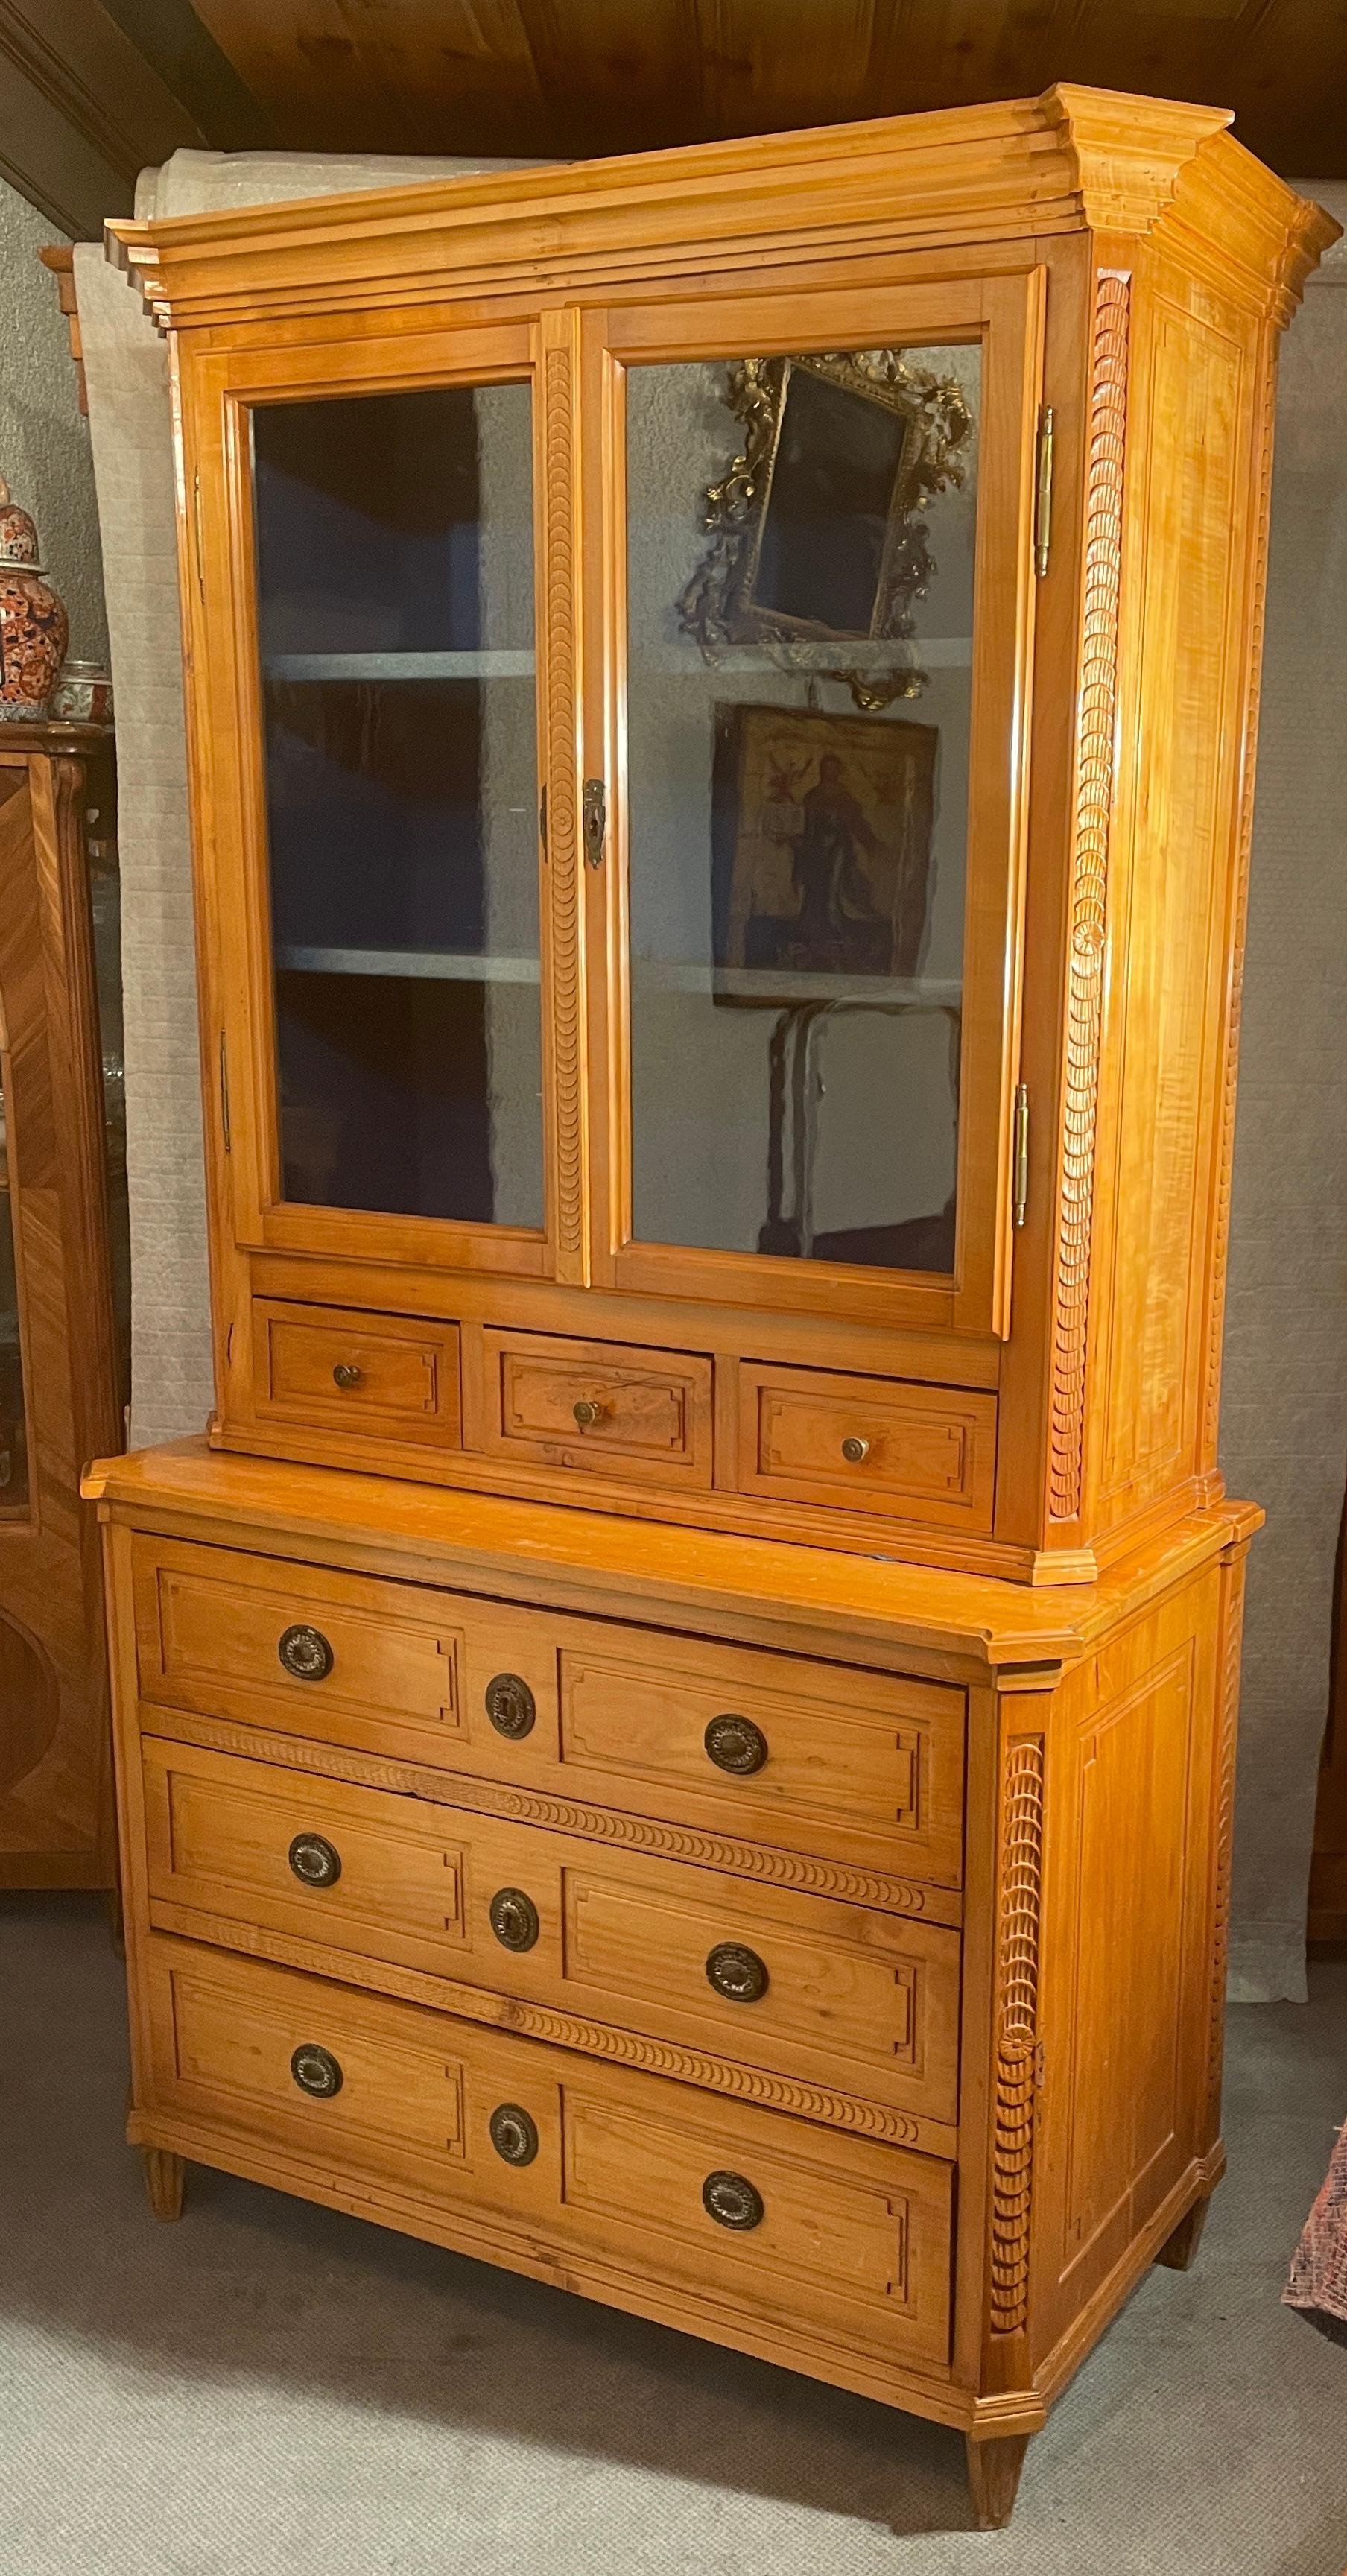 This unique antique Louis XVI Buffet comes from southern Germany and dates back to around 1780. It is made of cherry veneer and massive cherry wood. The buffet's lower part has a chest of drawers with three large drawers. On the upper part is a